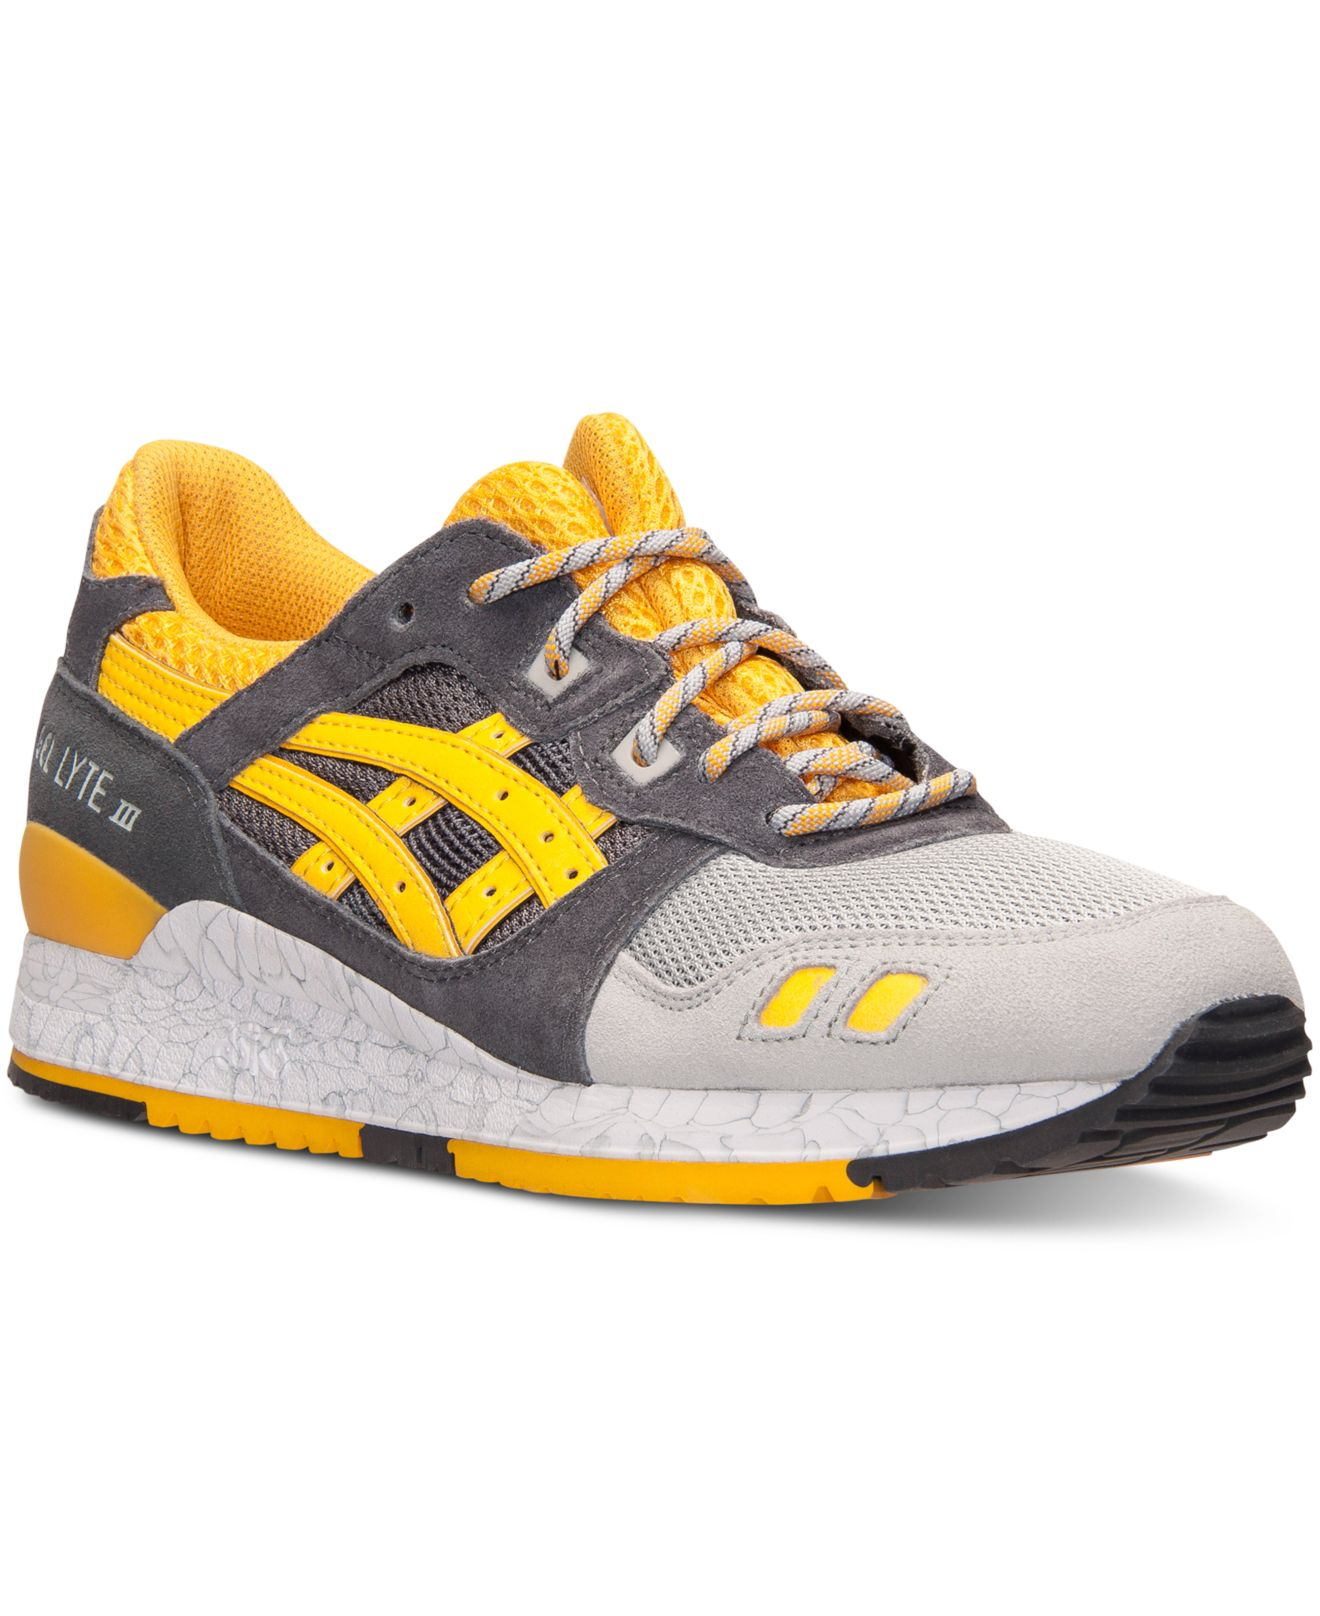 Lyst - Asics Men'S Gel-Lyte Iii Casual Sneakers From Finish Line in